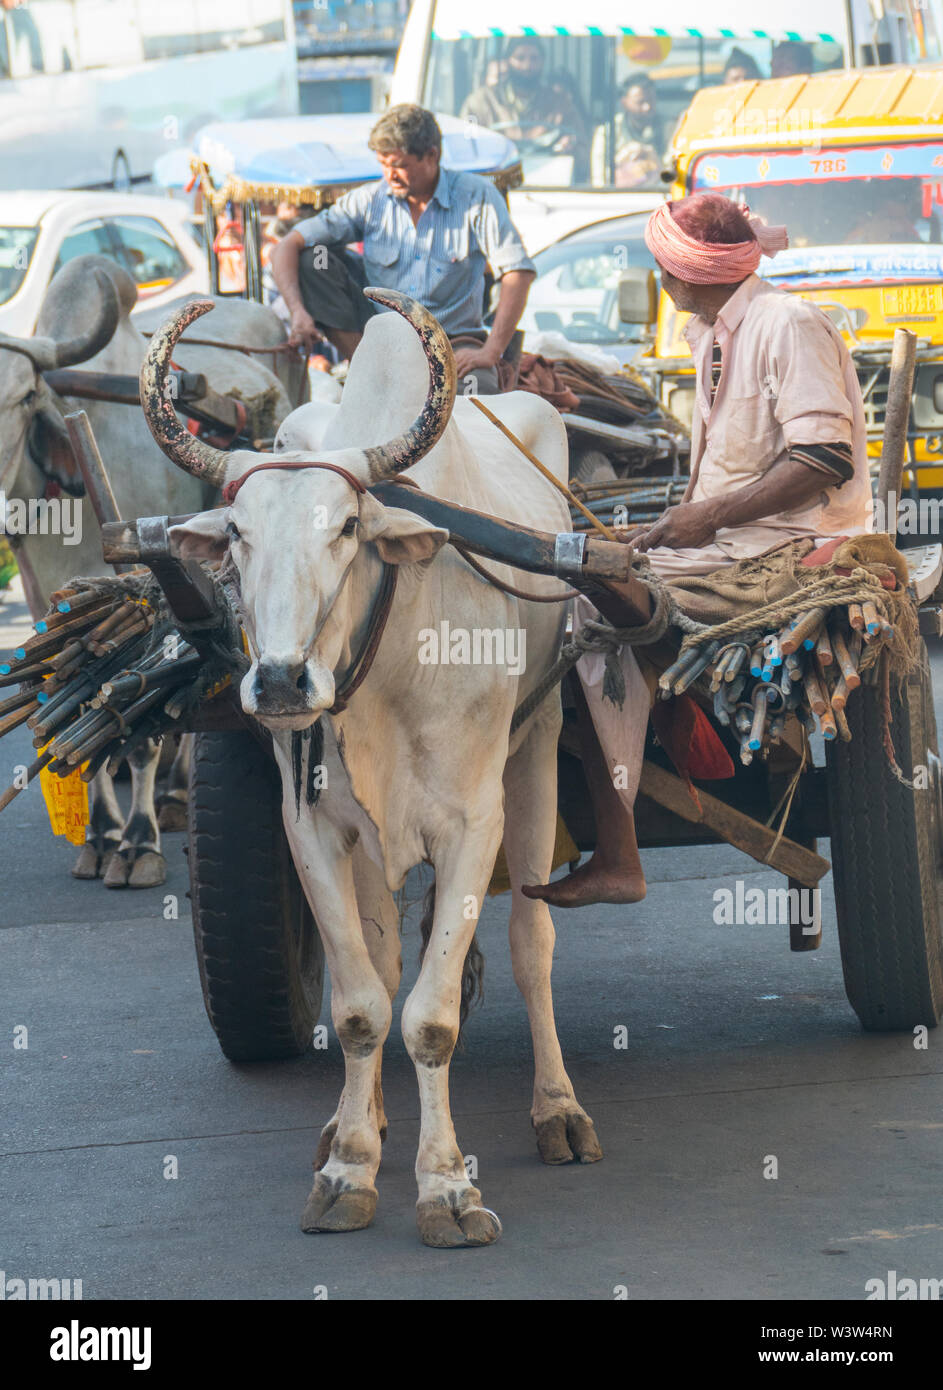 Trditional Indian Hindu Men with White Holy Cows Pullling Loaded Carts on a Busy Street in Jaipur in Rajasthan in India where the Cow is a Sacred. Stock Photo